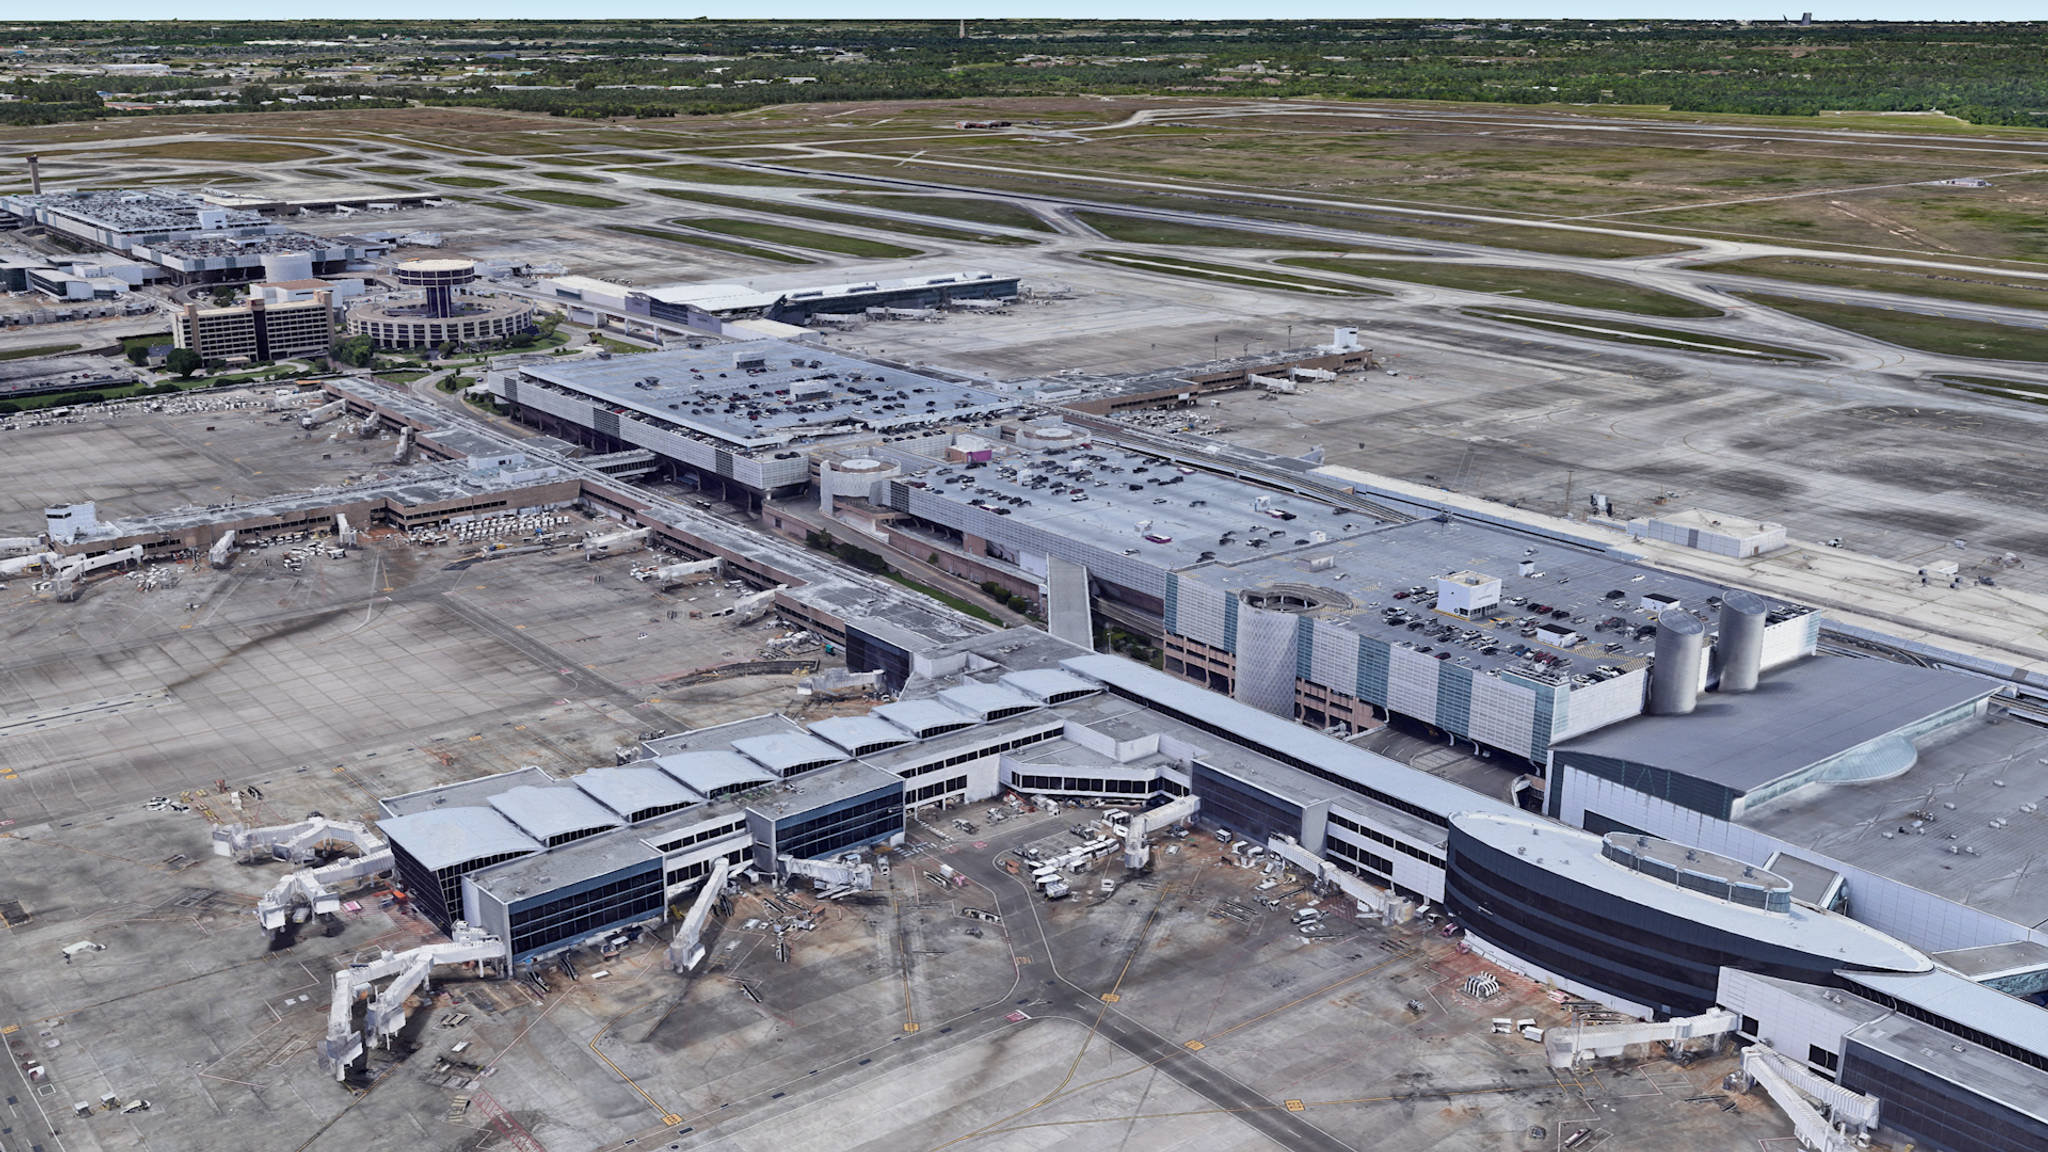  Aerial View of Houston Bush Airport Parking